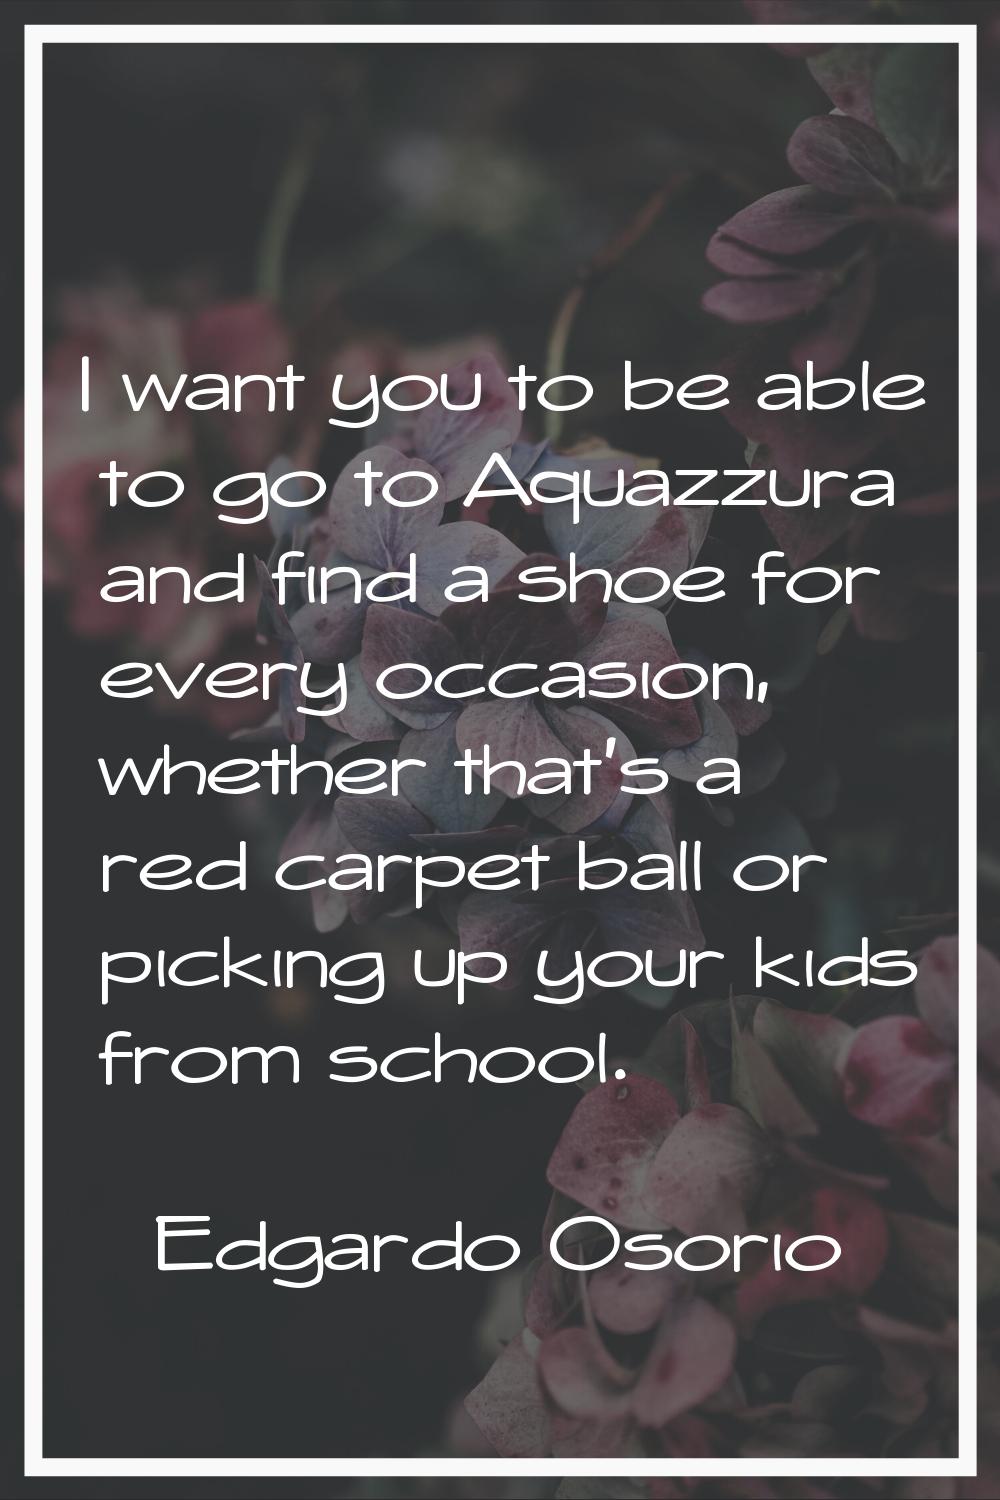 I want you to be able to go to Aquazzura and find a shoe for every occasion, whether that's a red c